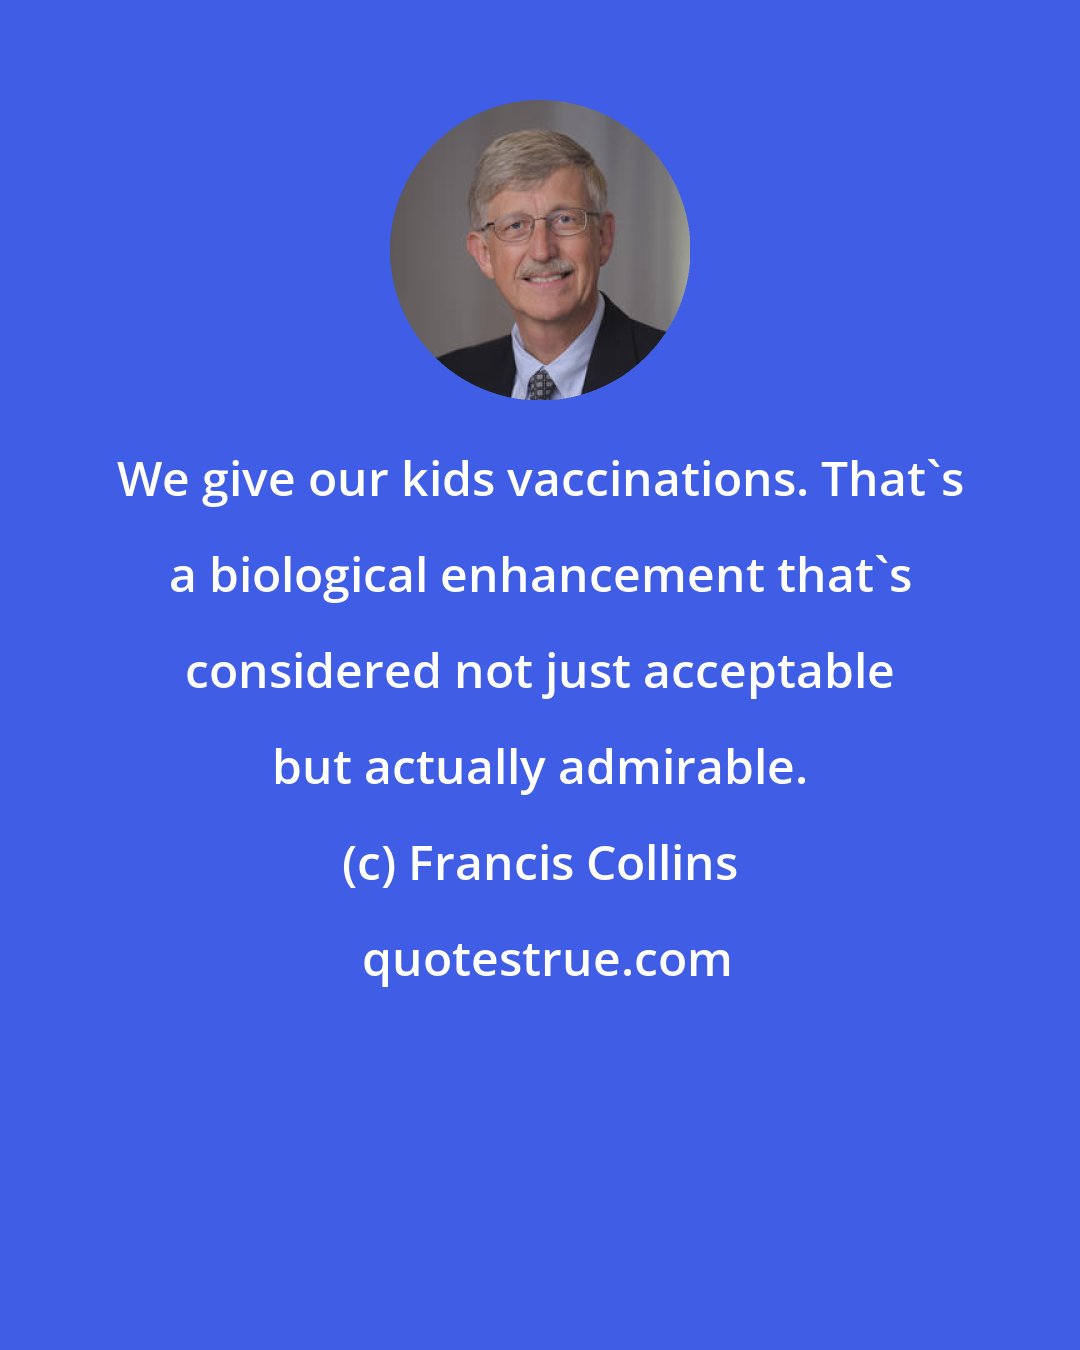 Francis Collins: We give our kids vaccinations. That's a biological enhancement that's considered not just acceptable but actually admirable.